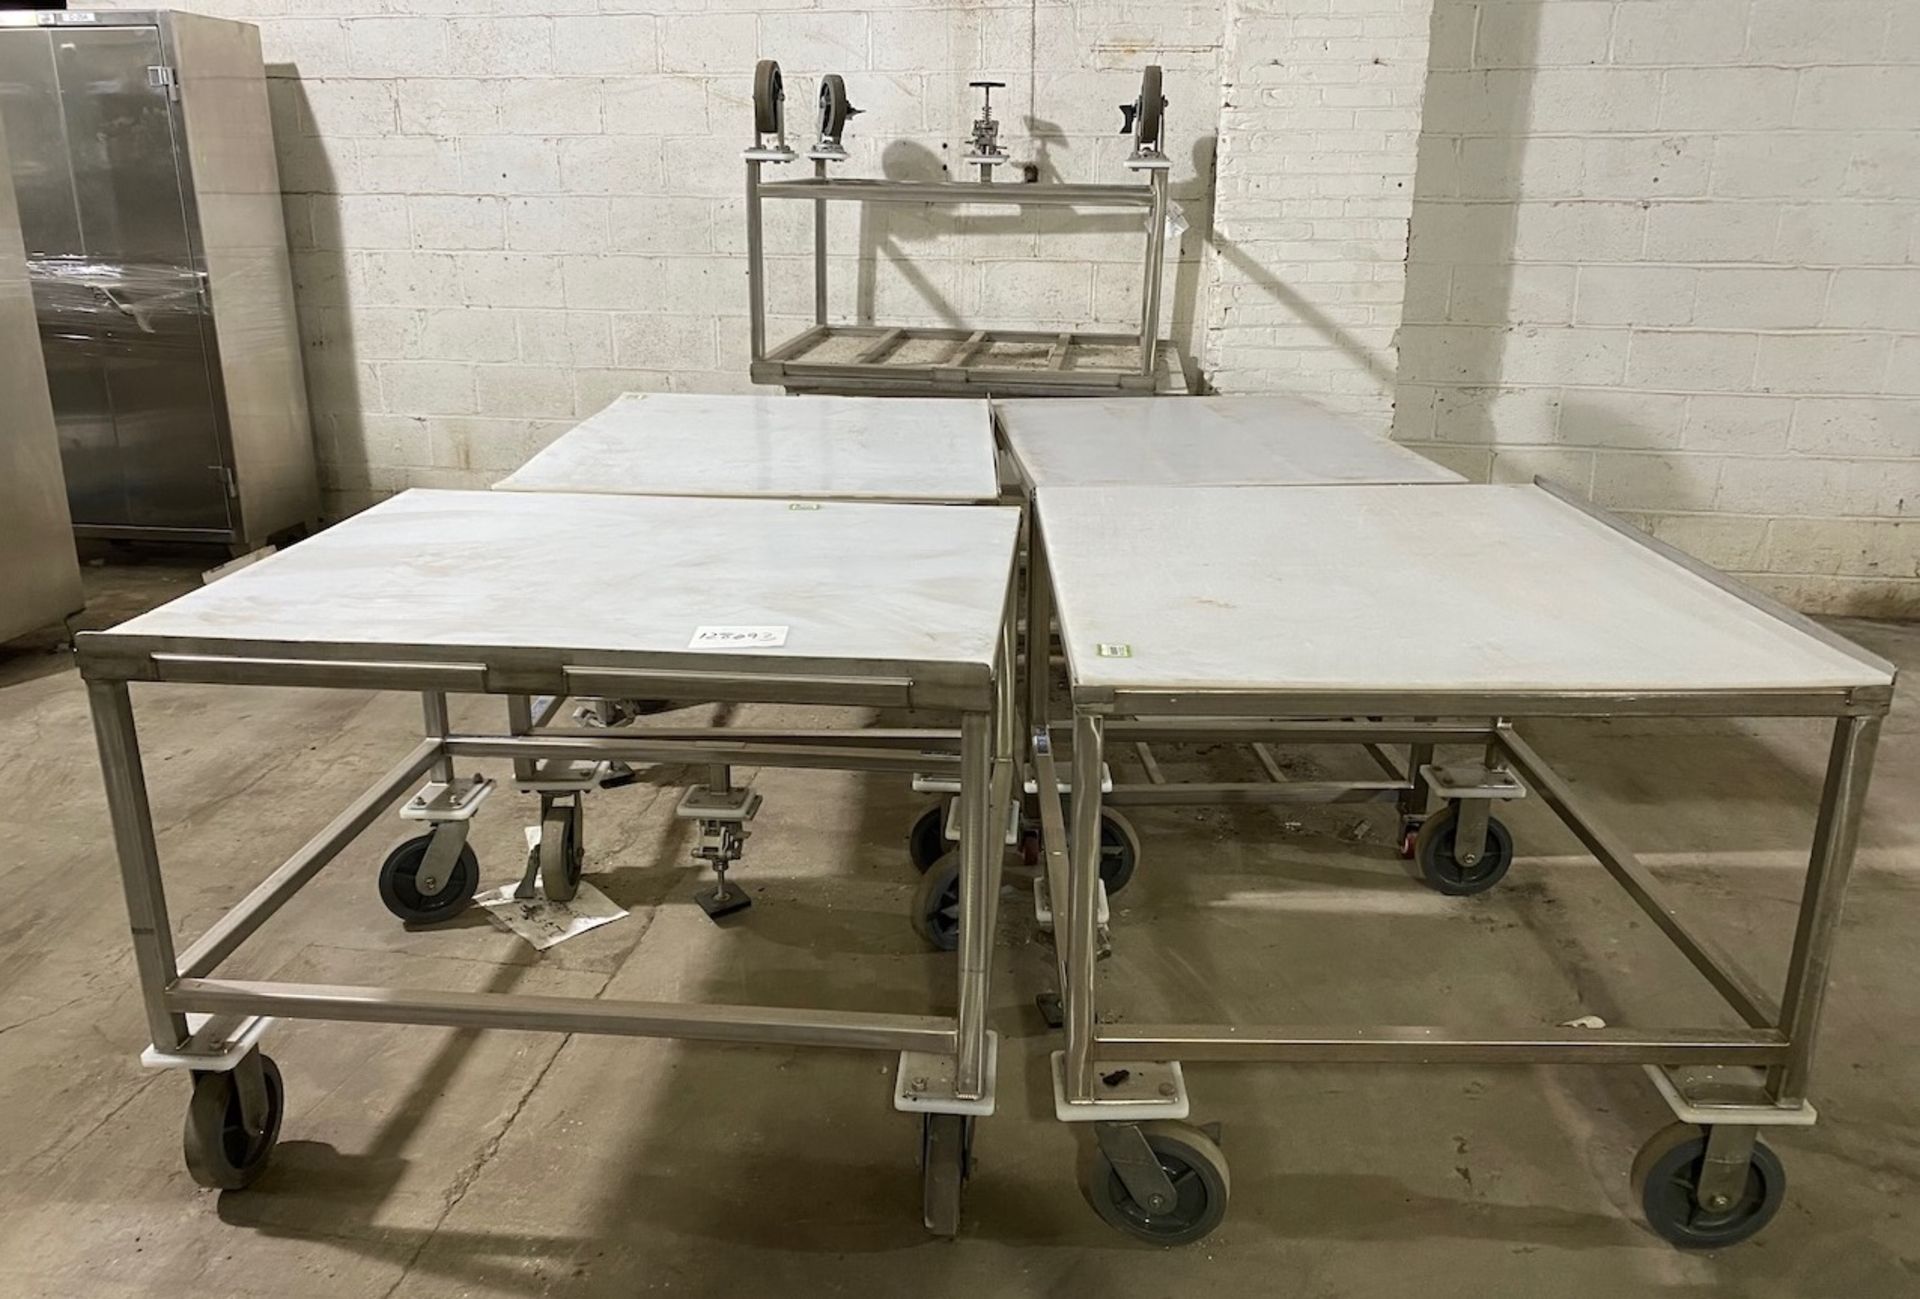 Lot of six Stainless Tables with Plastic Tops